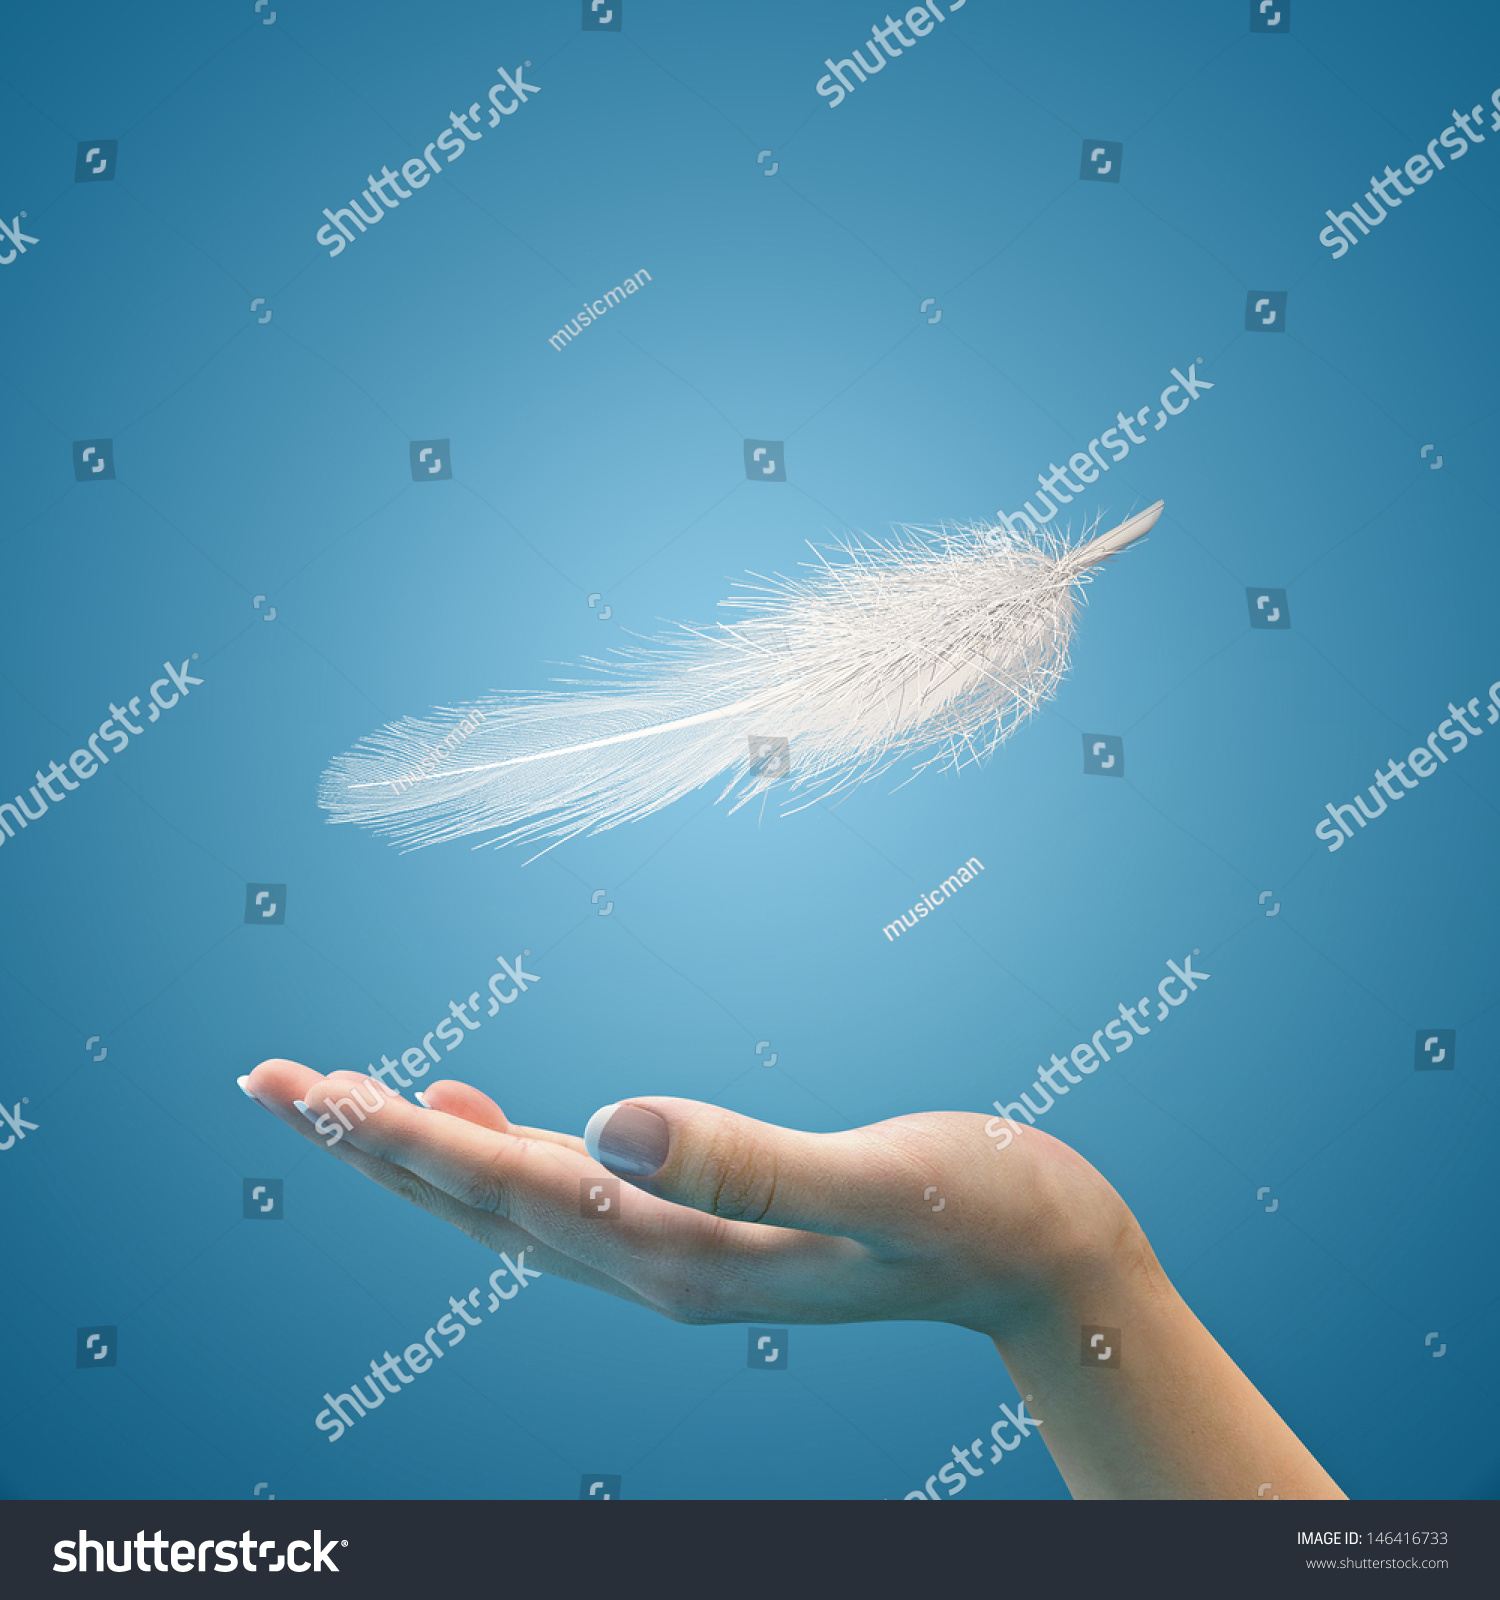 Easy feather in the air on the palm #146416733